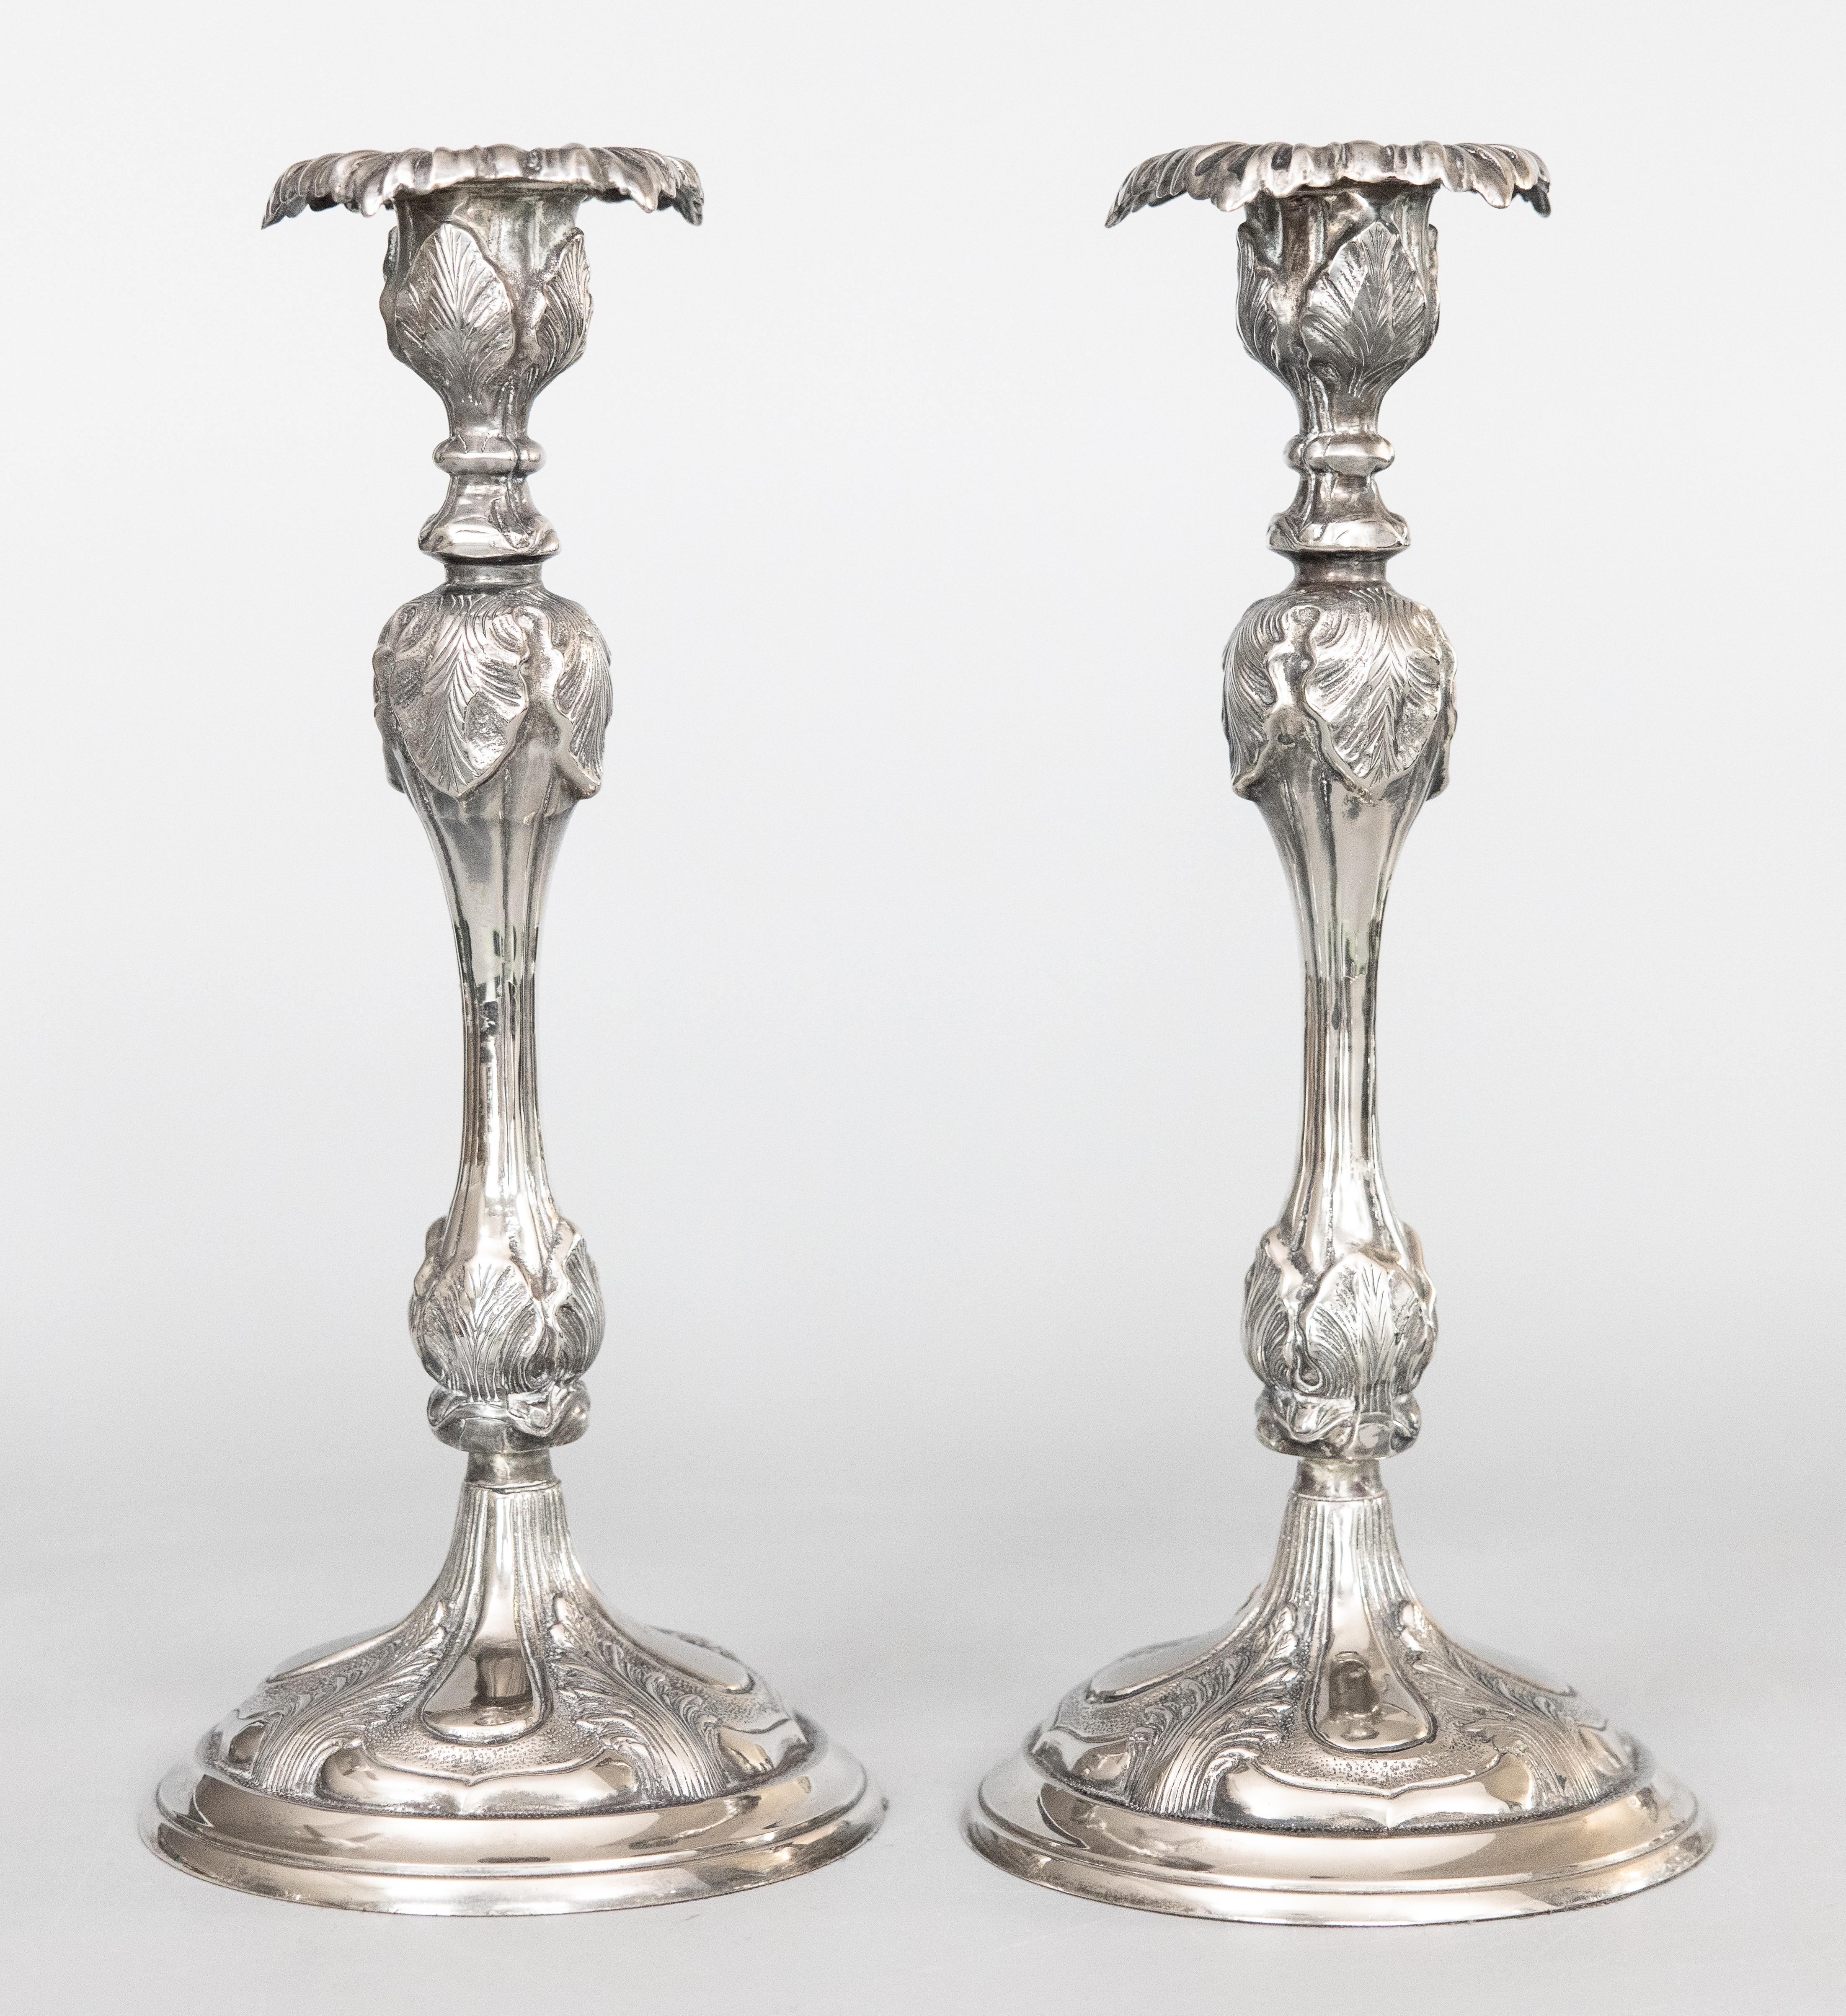 A fabulous tall pair of antique Art Nouveau English silverplated candlesticks, circa 1900. These gorgeous candle holders are a nice large size and heavy, together weighing over 5 1/2 lbs, with a stylish acanthus leaf design in a lovely aged silver